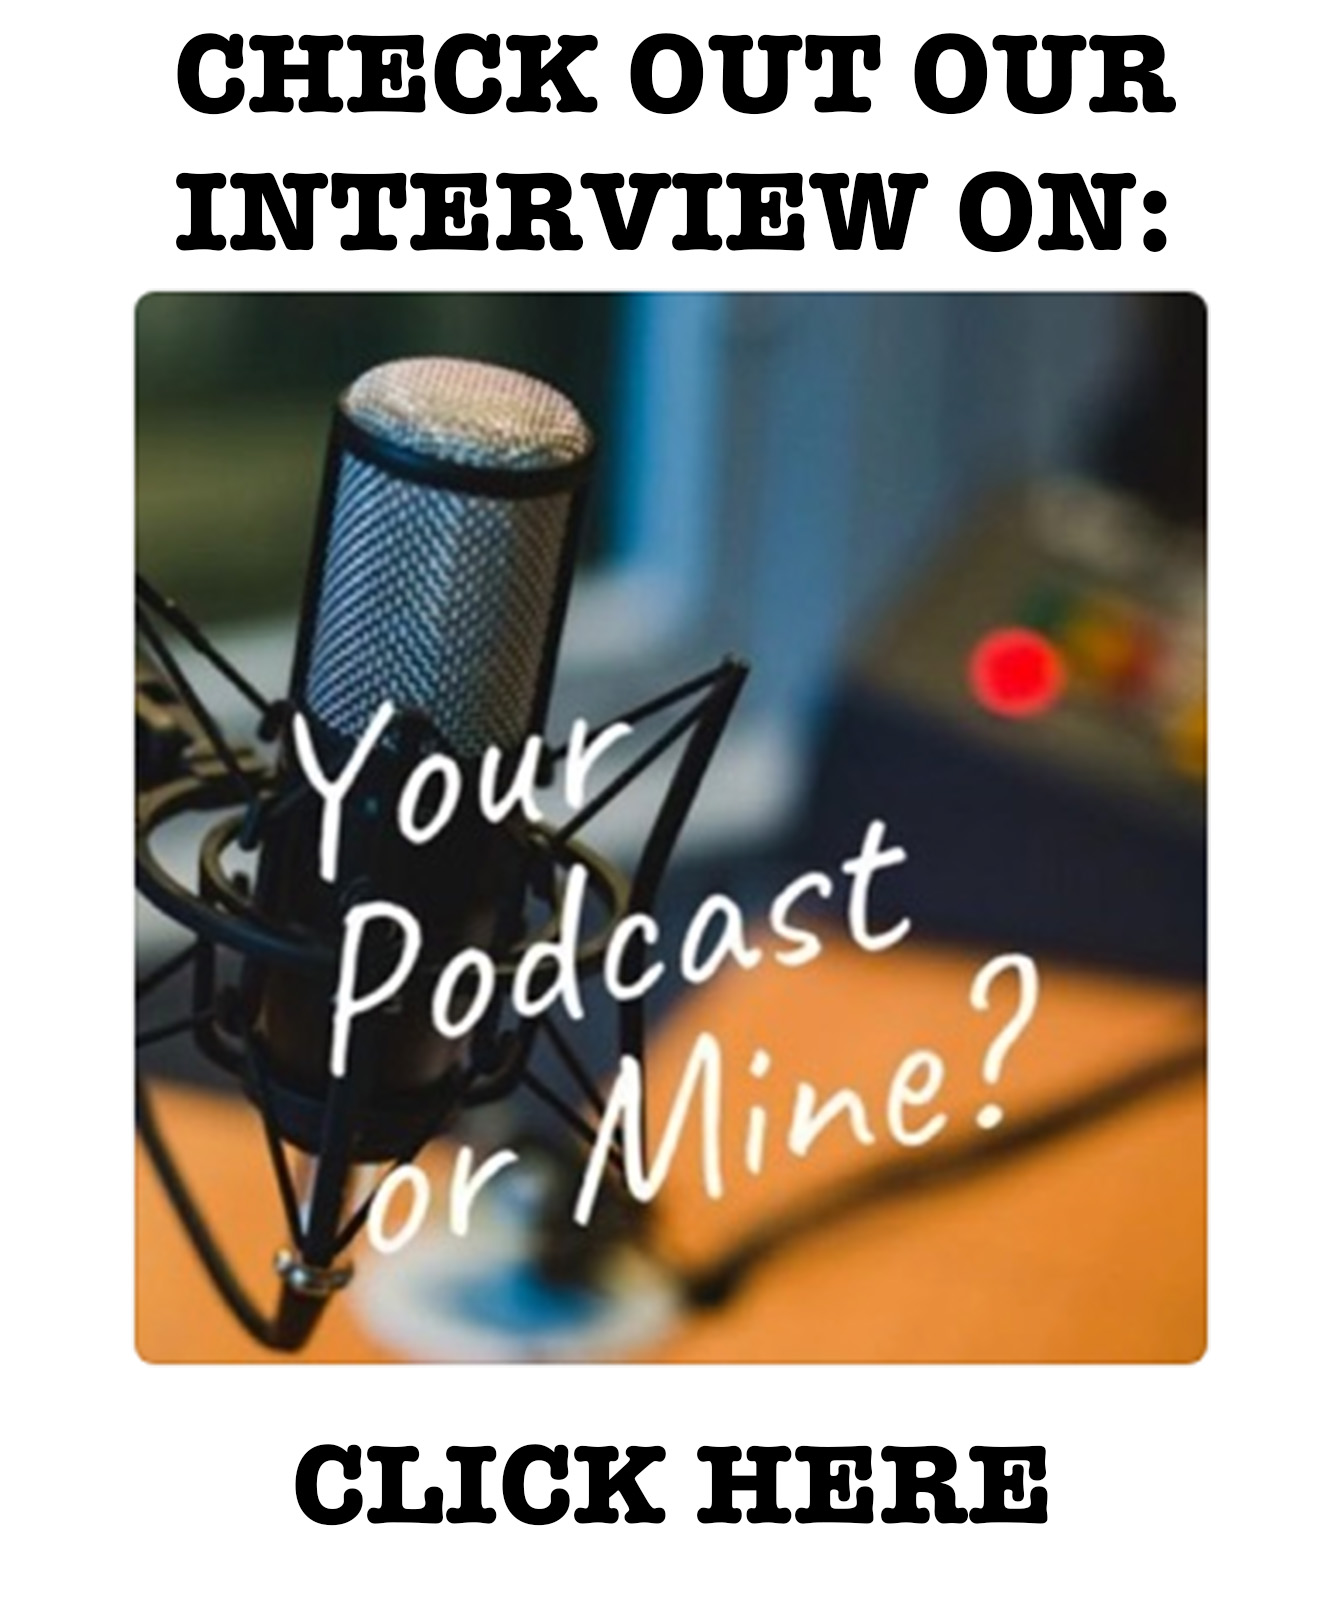 link to Brian's interview on the Your Podcast or Mine podcast